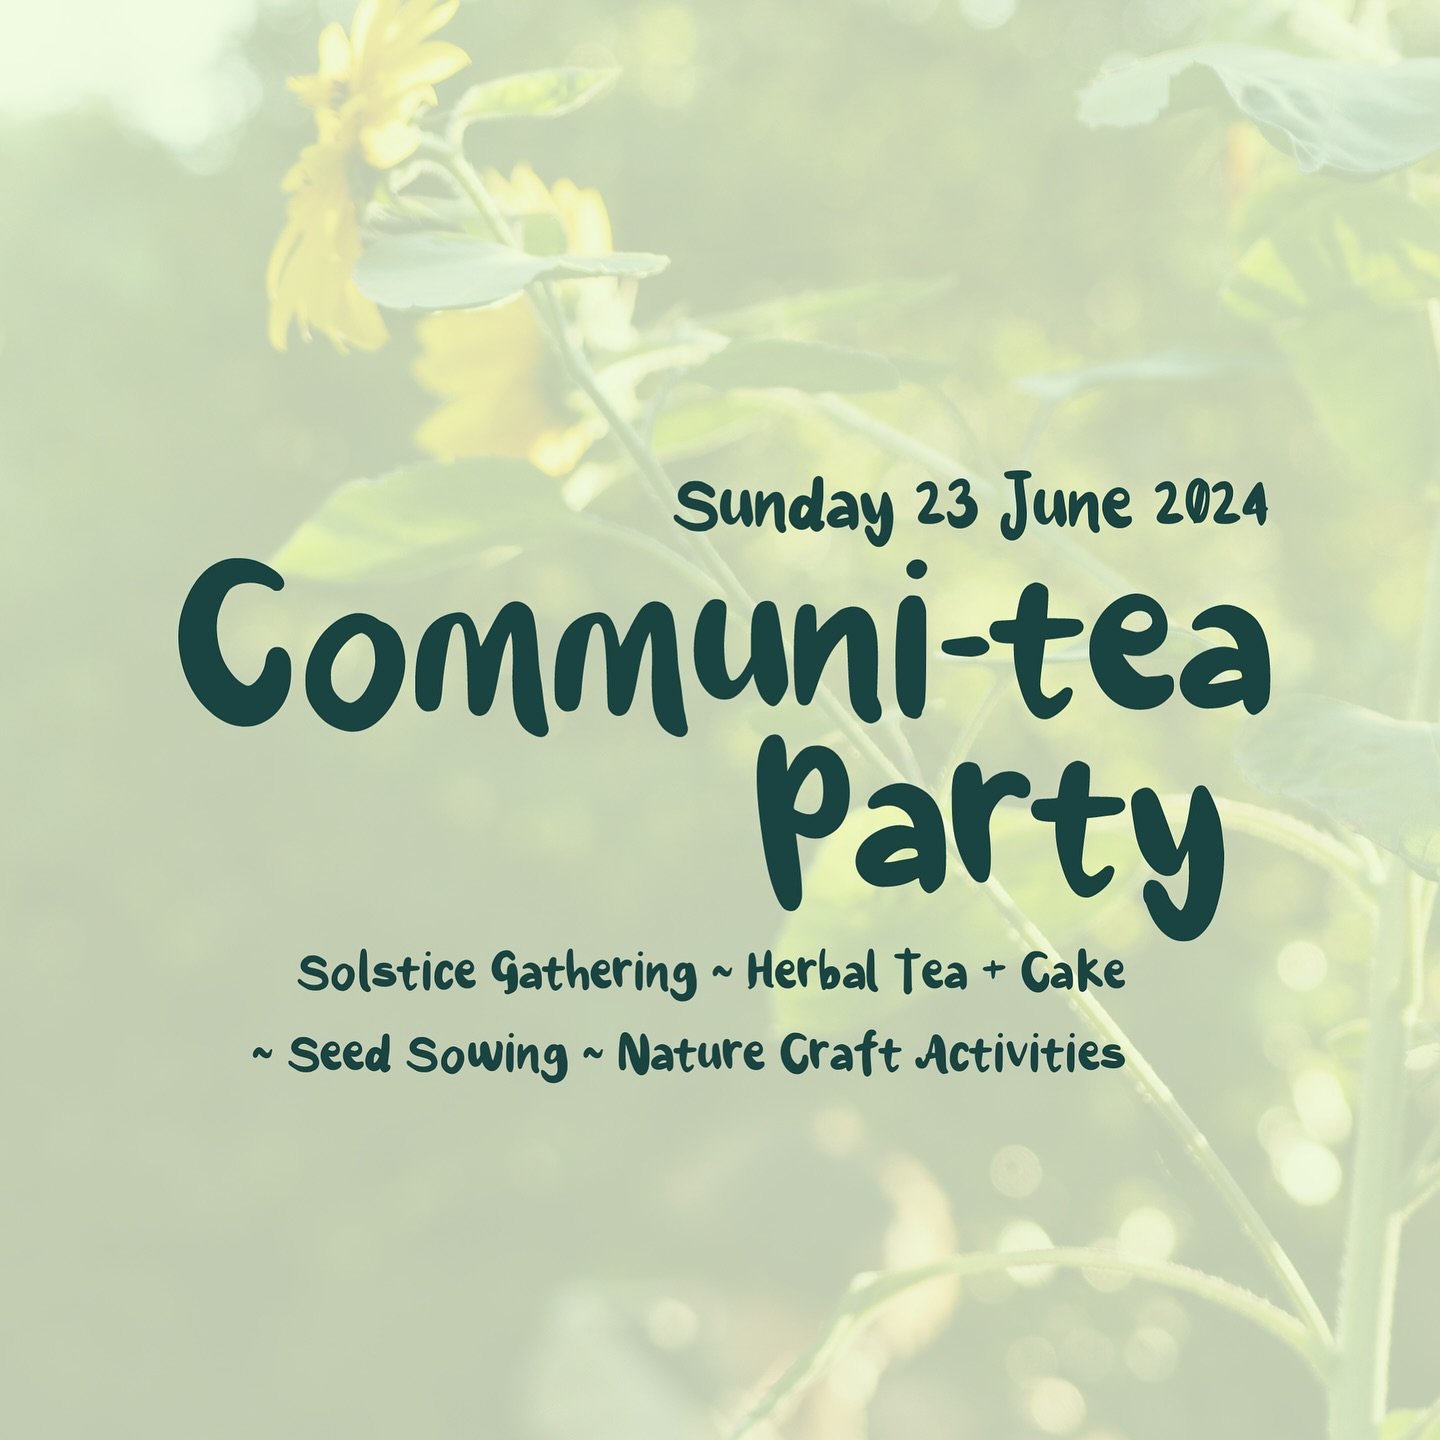 Join us for an open afternoon at our garden in Hackney Wick in celebration of the summer solstice. We will have a mix of free activities for all ages including seed sowing and nature craft activities. 

Sunday 23 June 2024 2:00 - 6:00pm
Trowbridge Ga